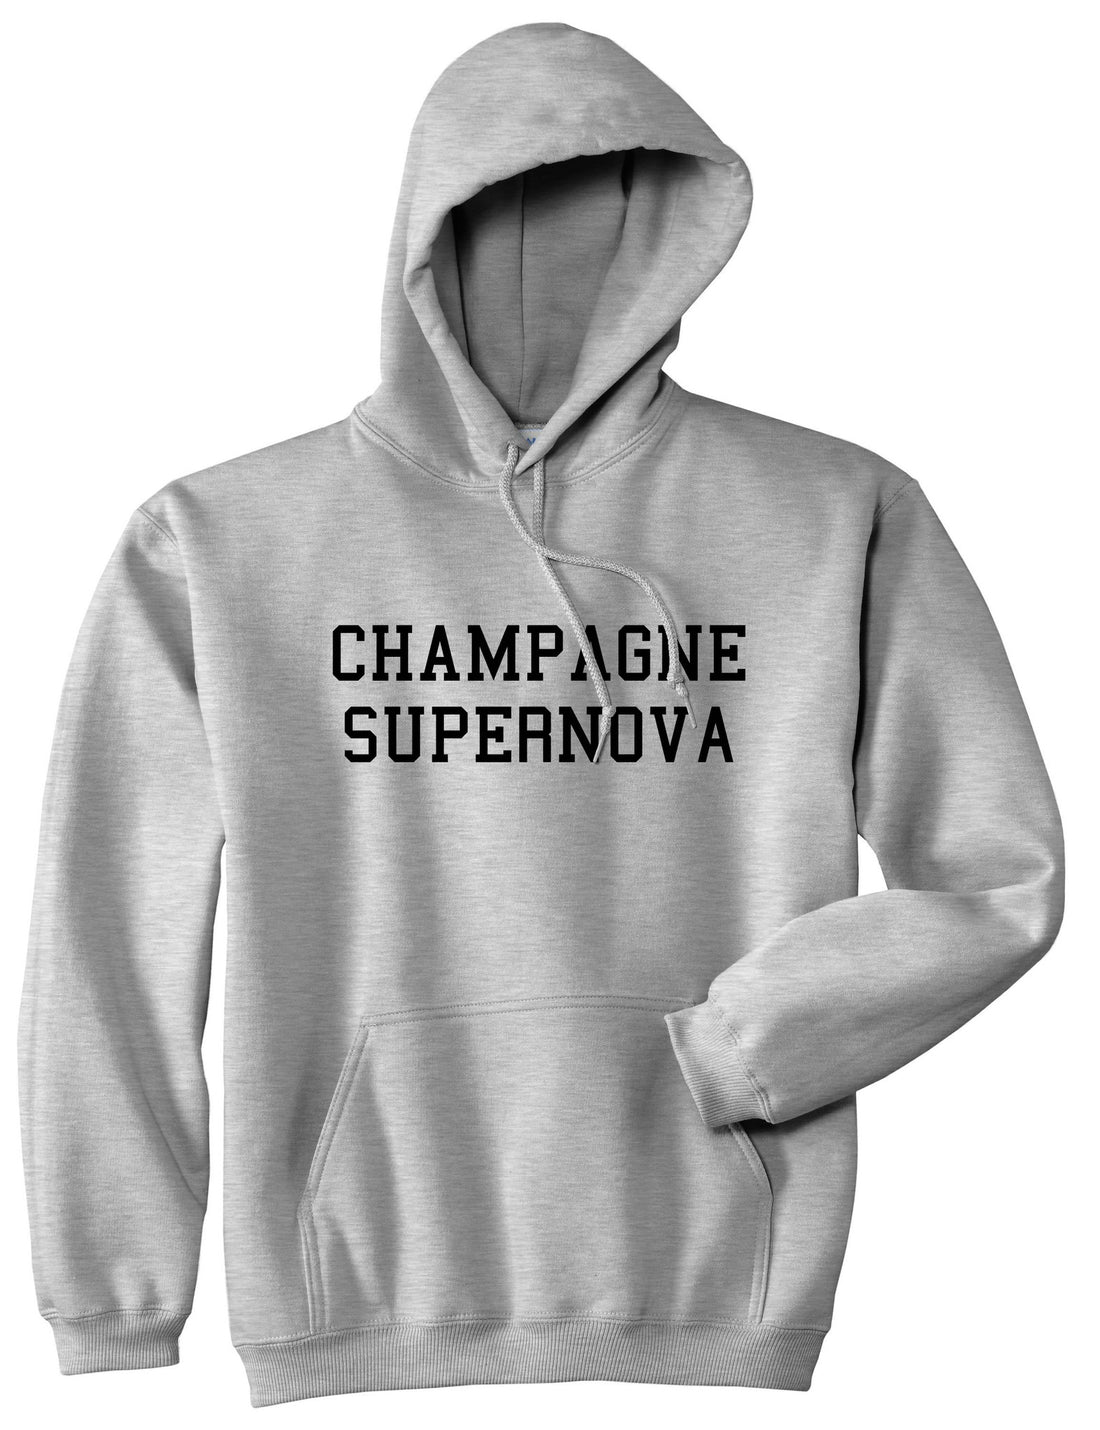 Champagne Supernova Pullover Hoodie Hoody in Grey by Kings Of NY